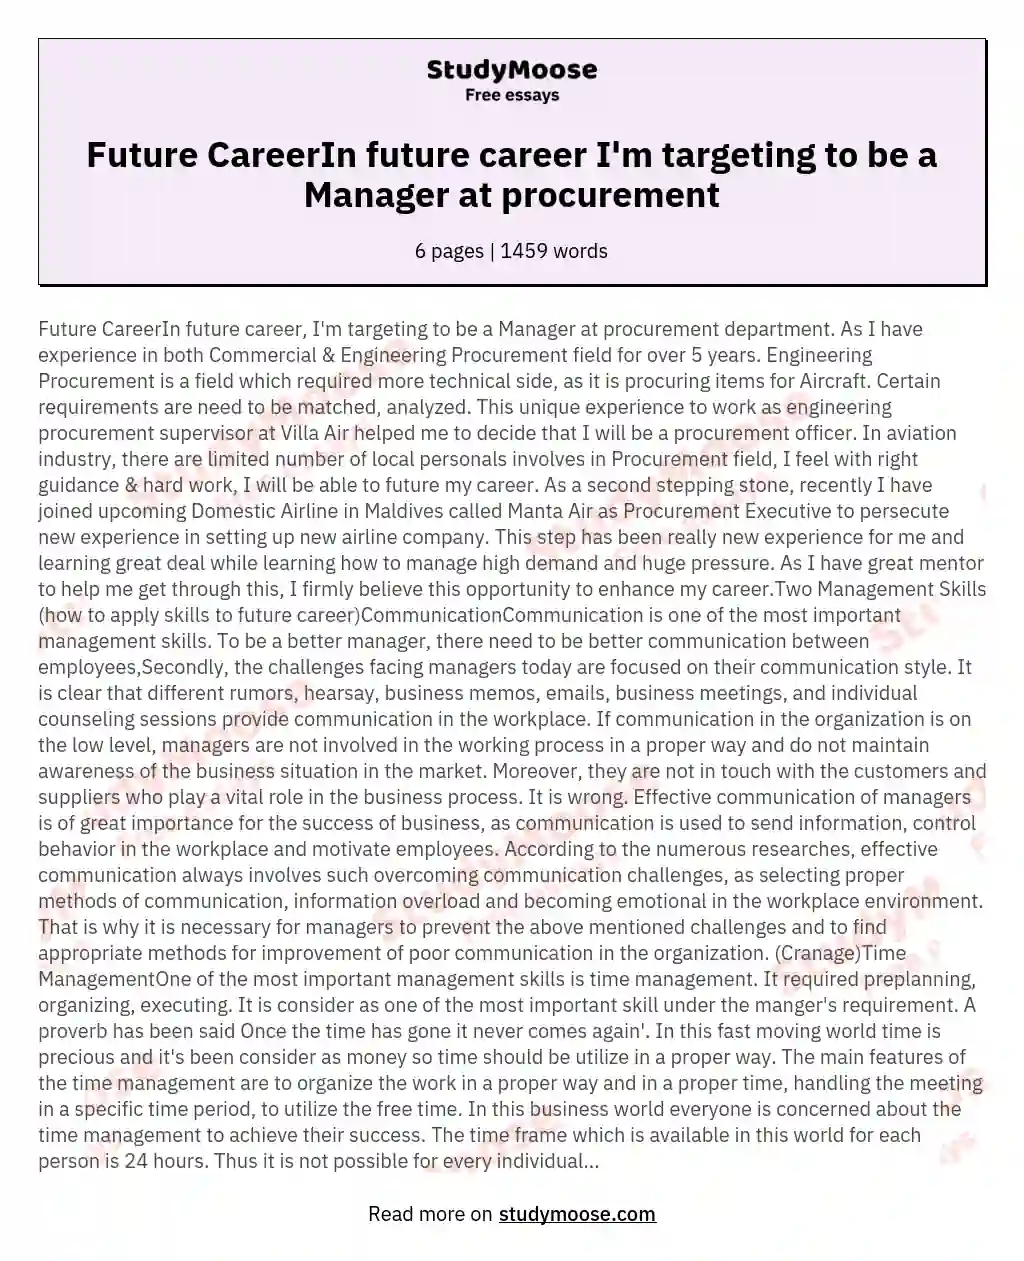 Future CareerIn future career I'm targeting to be a Manager at procurement